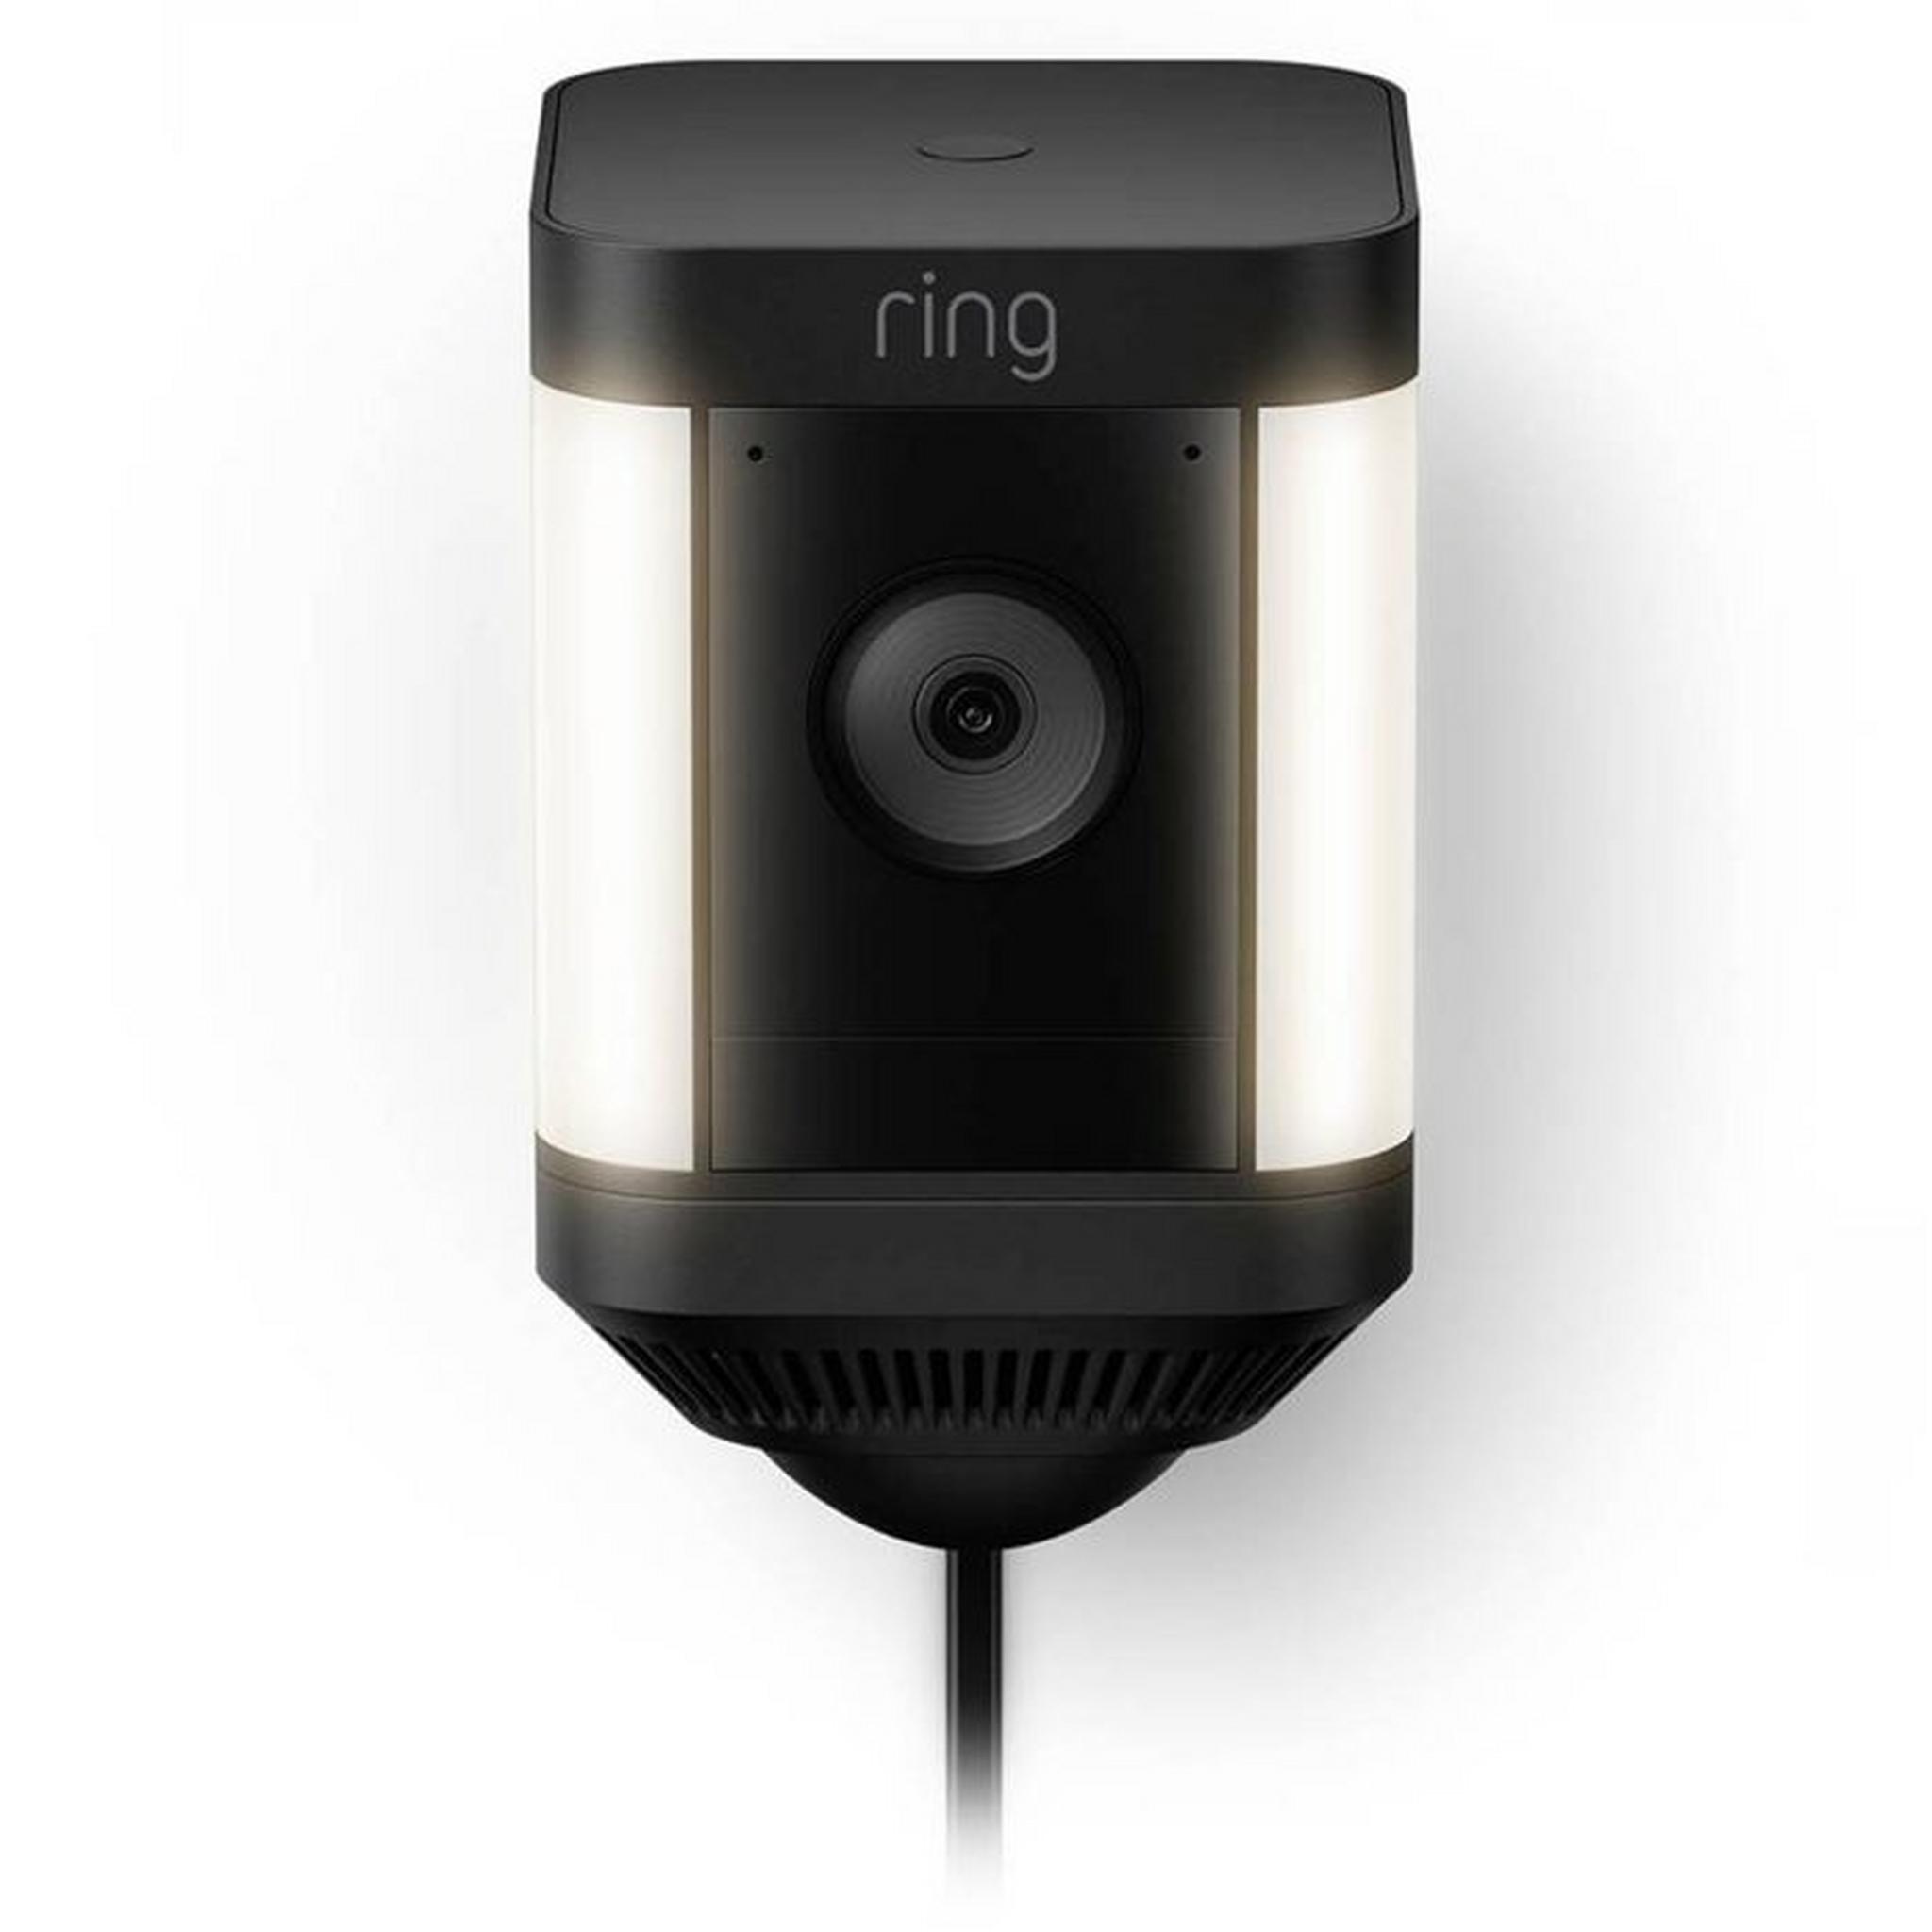 Ring Spotlight Cam Plus Plug In Security Camera, with Built -in Security Siren, +2 LED Spotlights, 8SH1S2-BME0 - Black